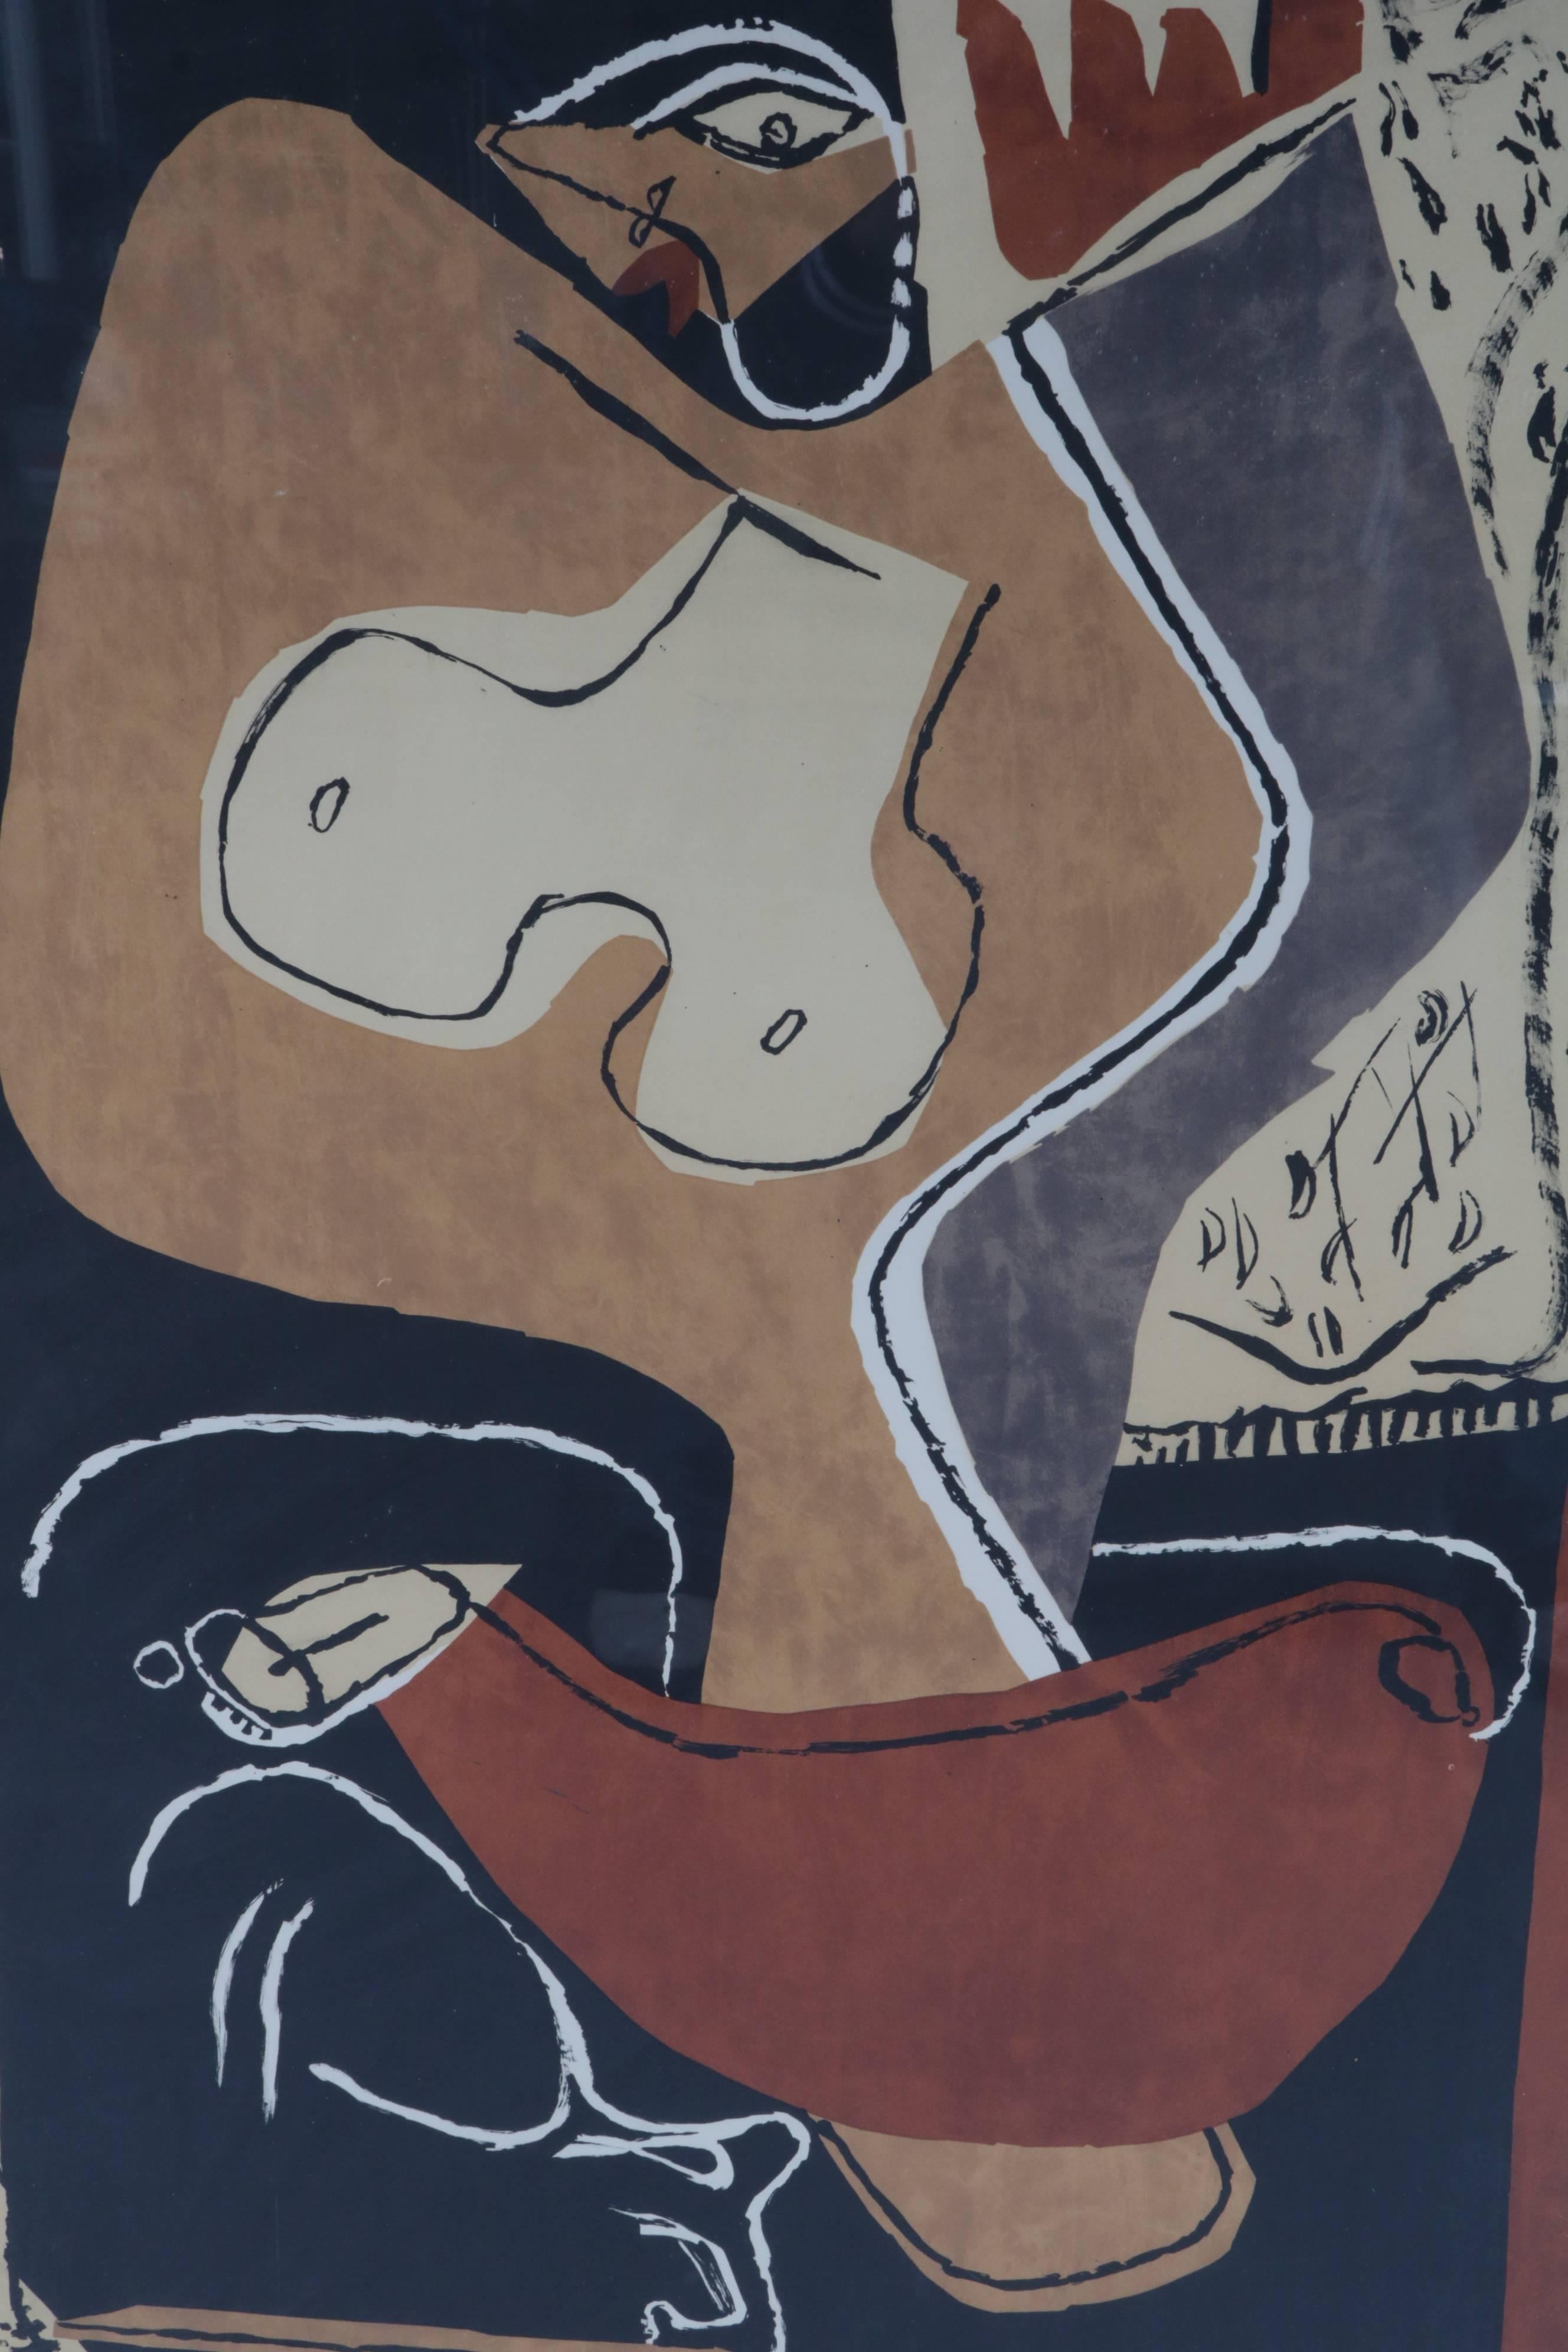 A beautiful, rare lithograph by Le Corbusier, printed by Mourlot in Paris, France 1954.

This artpiece is named Femme a la Main Levee meaning Woman with the raised hand Informally, this is also used for something being a first draft, possibly